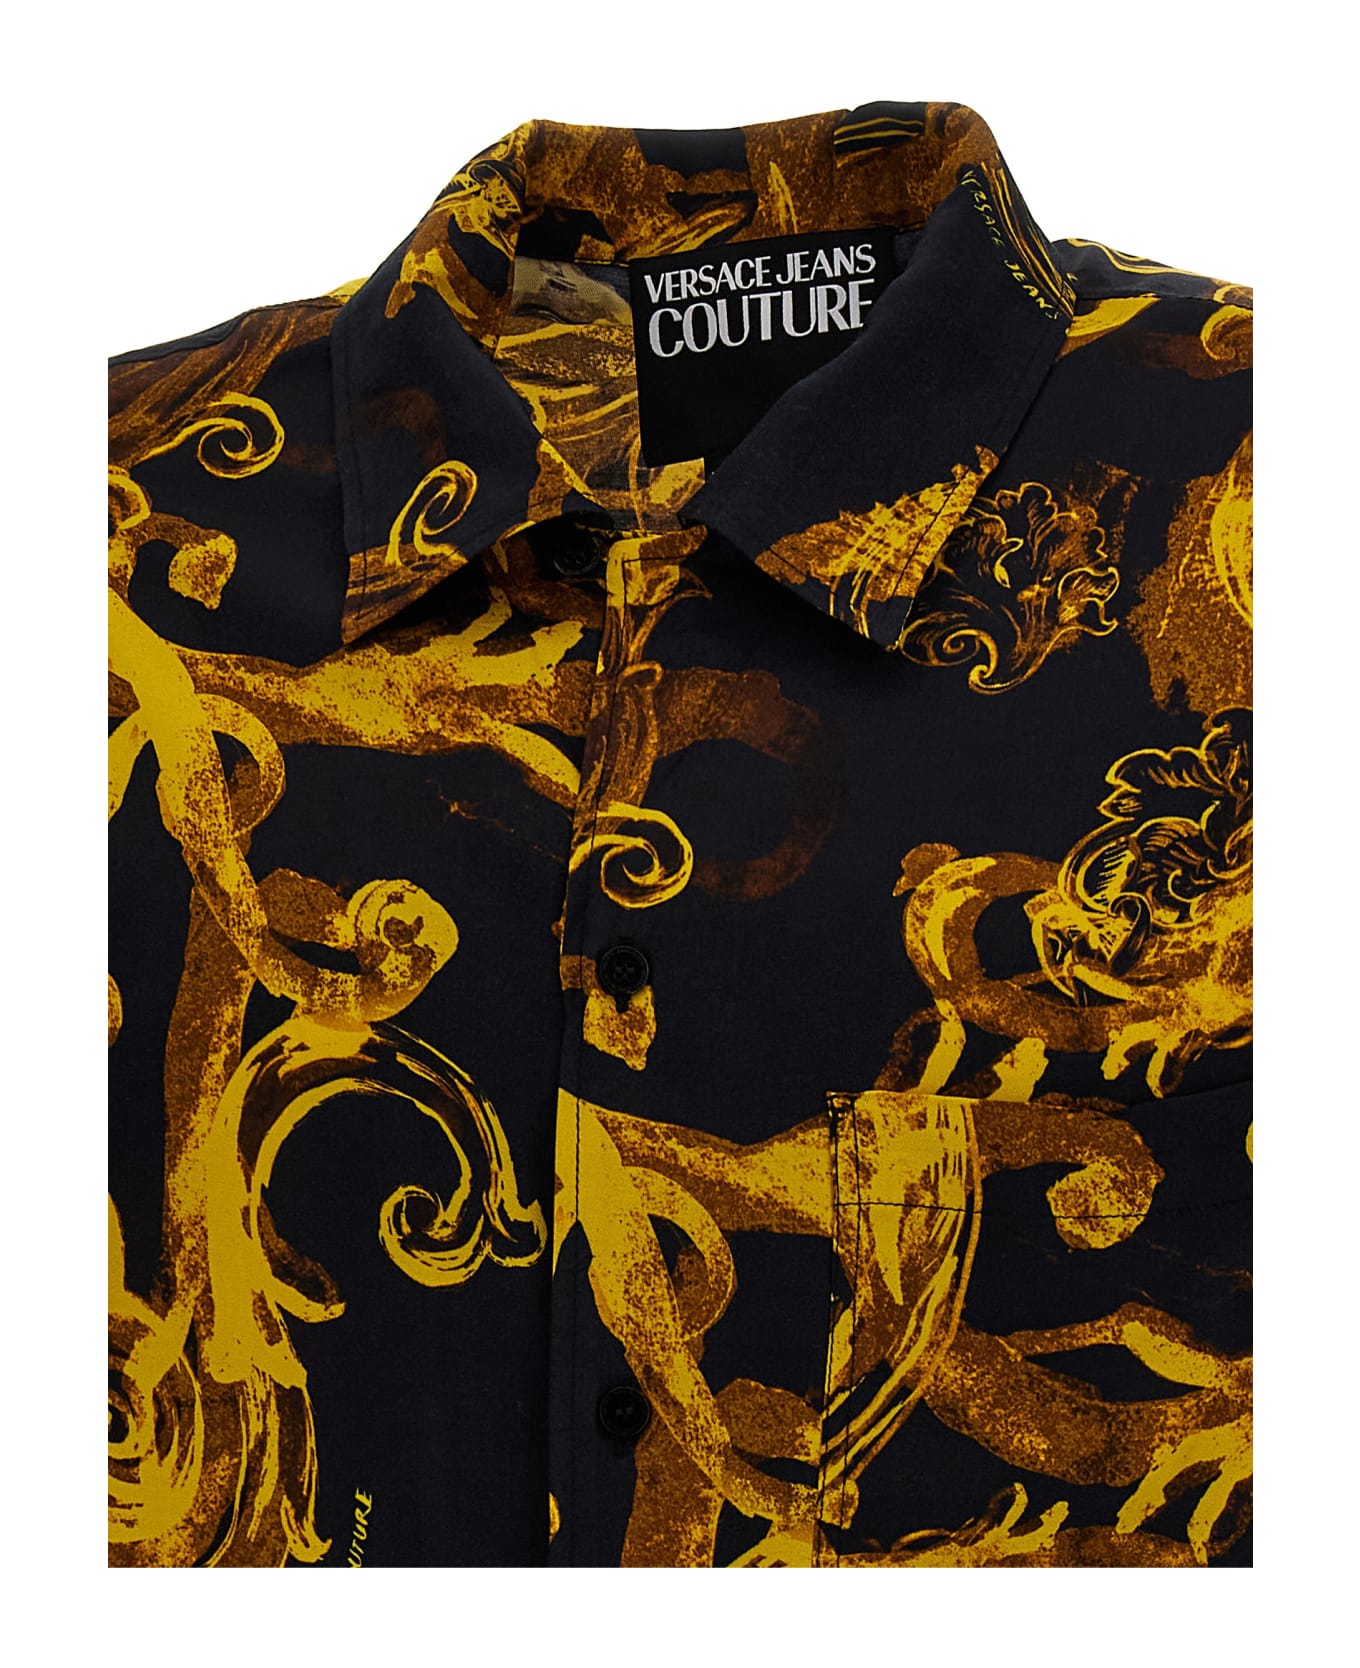 Versace Jeans Couture 'barocco' Shirt - Multicolor